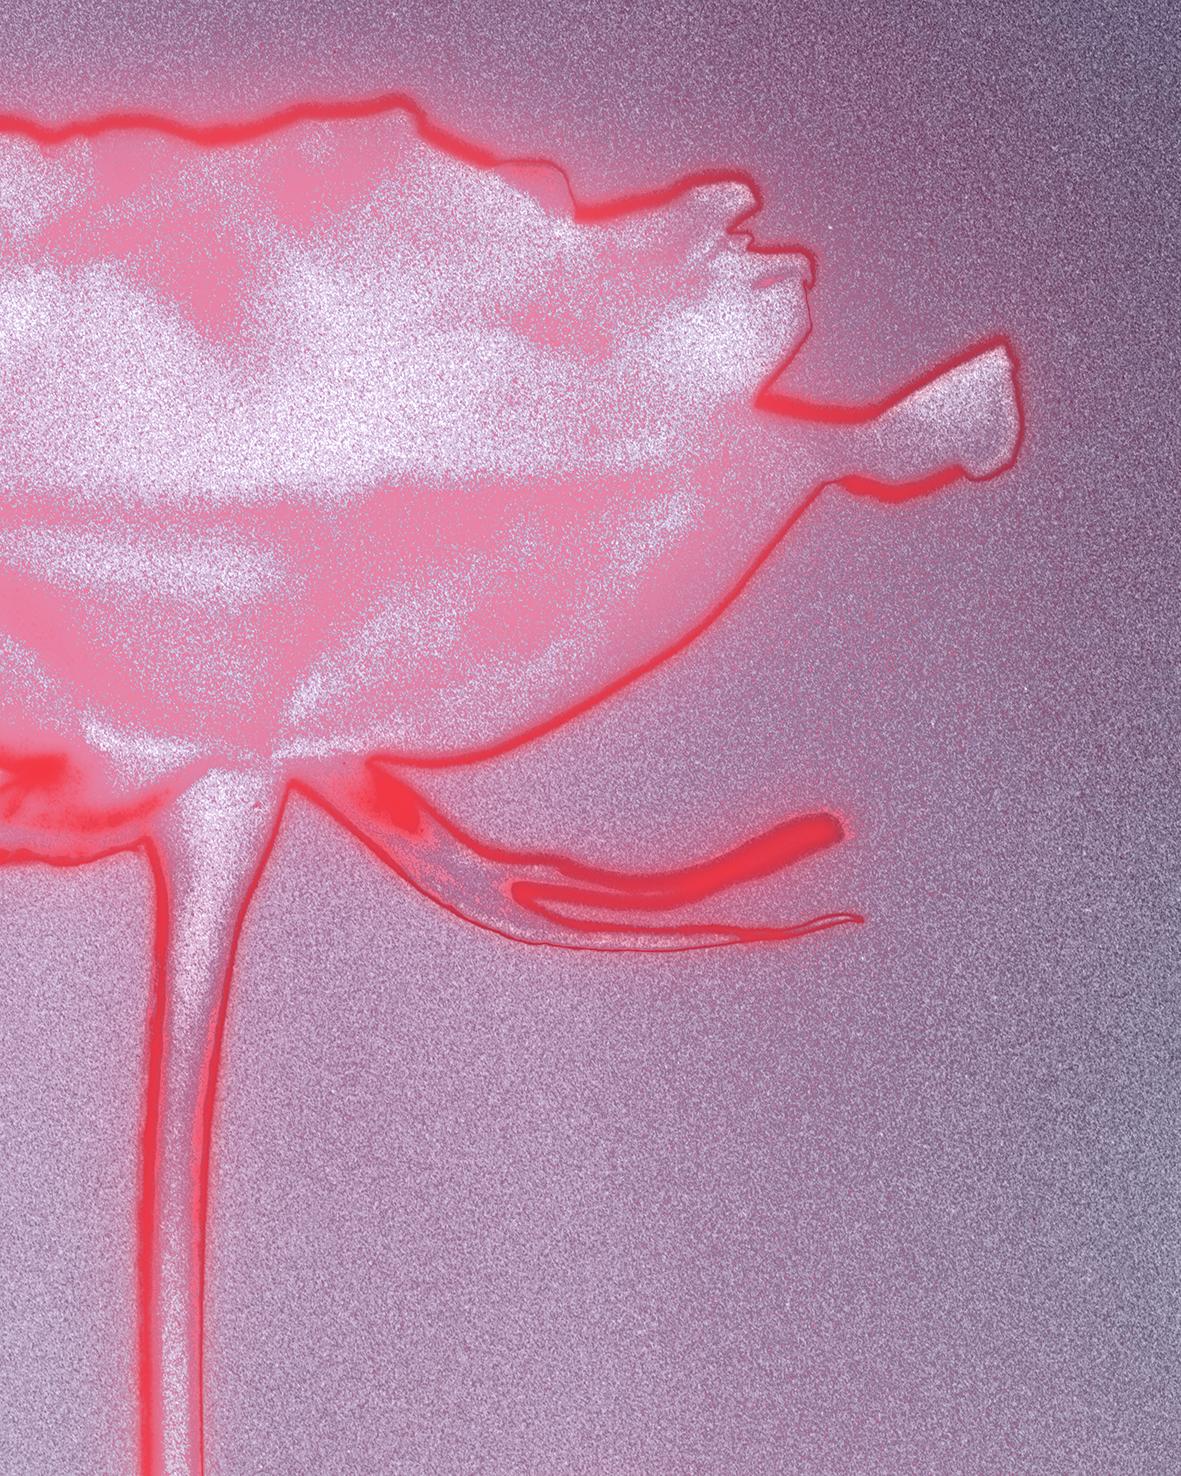 'Rose glow' a still-life analogue photograph, contemporary mix media, pink/red - Photograph by Ugne Pouwell